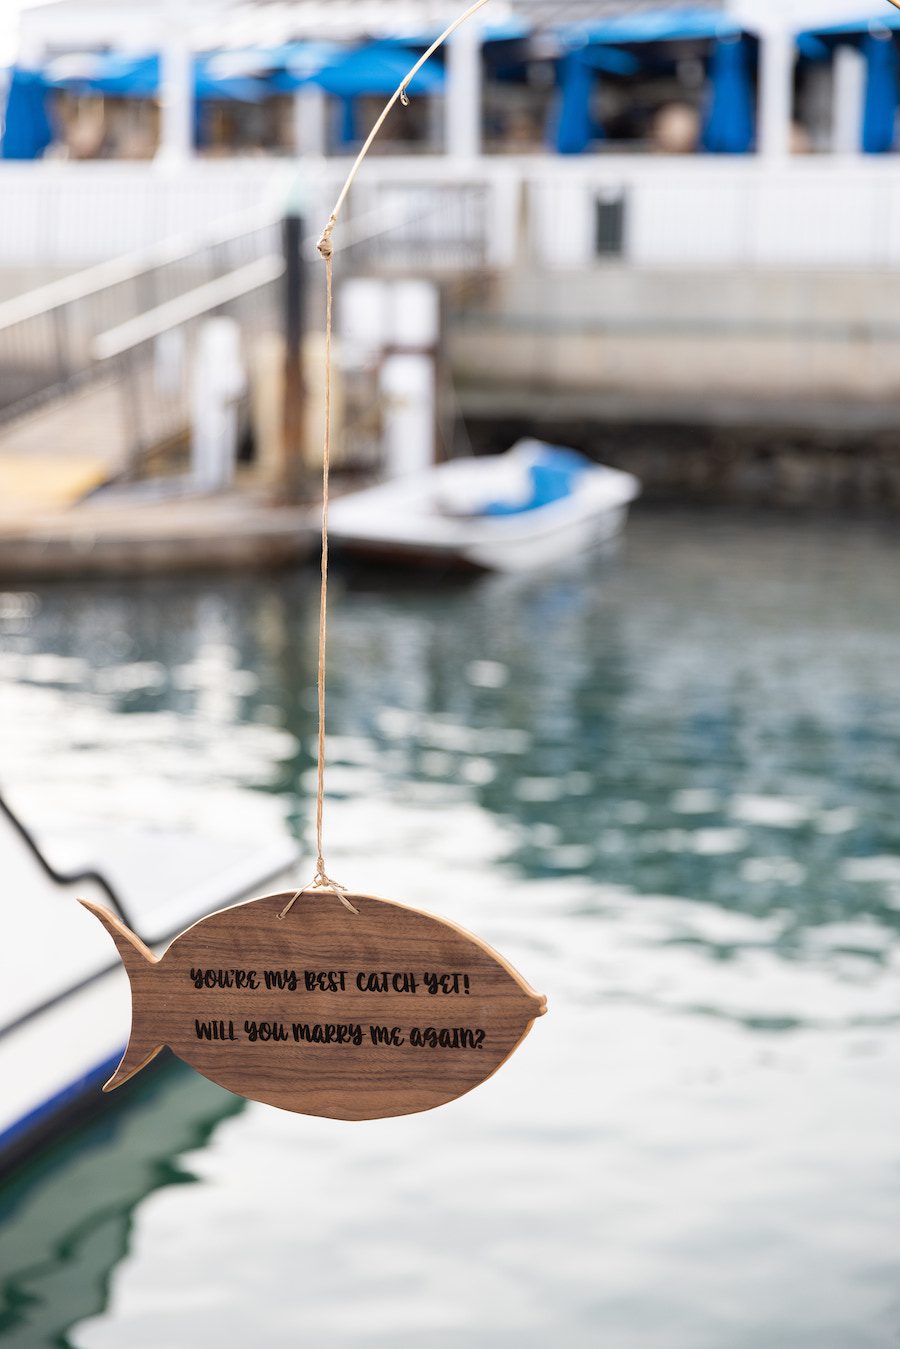 Custom details of this sail boat proposal included a custom fish sign that read "Will you marry me again"